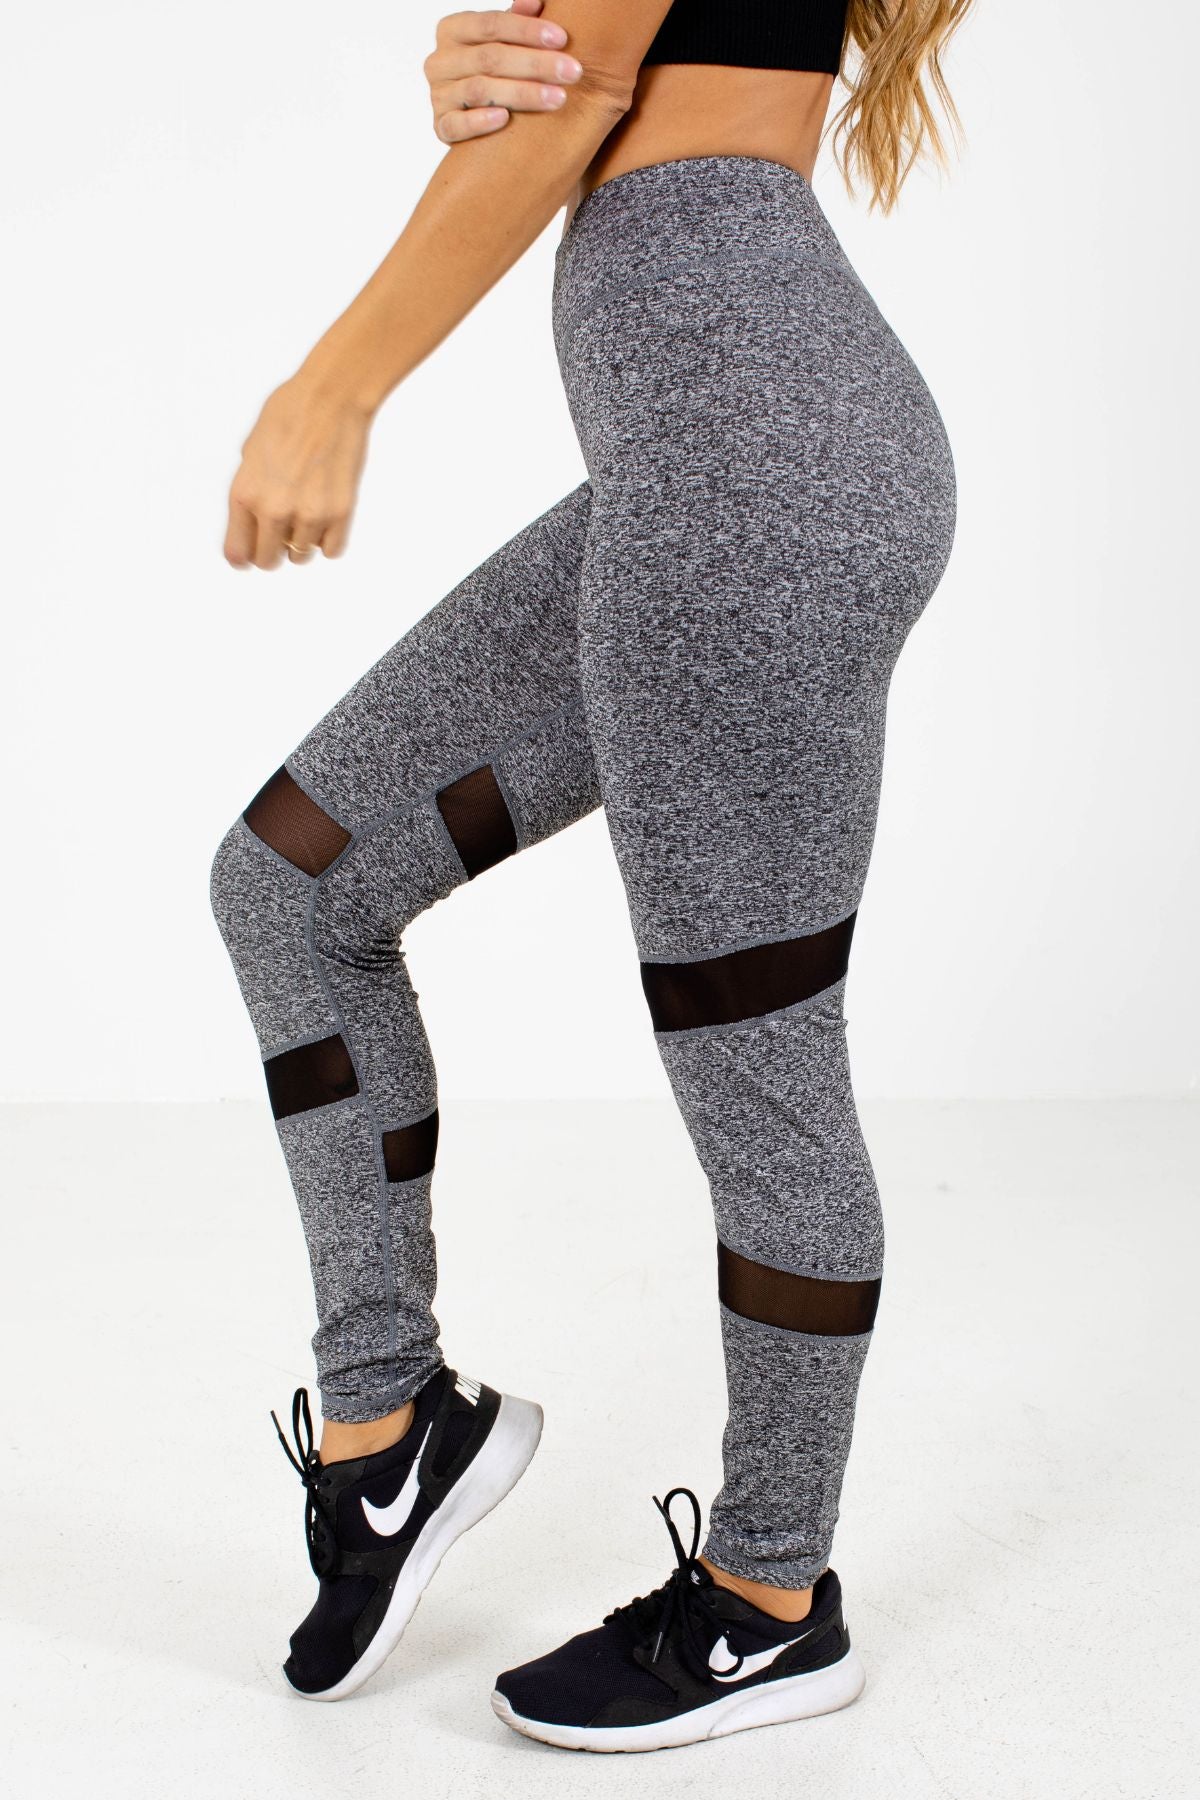 Gray Cute and Comfortable Boutique Activewear Leggings for Women